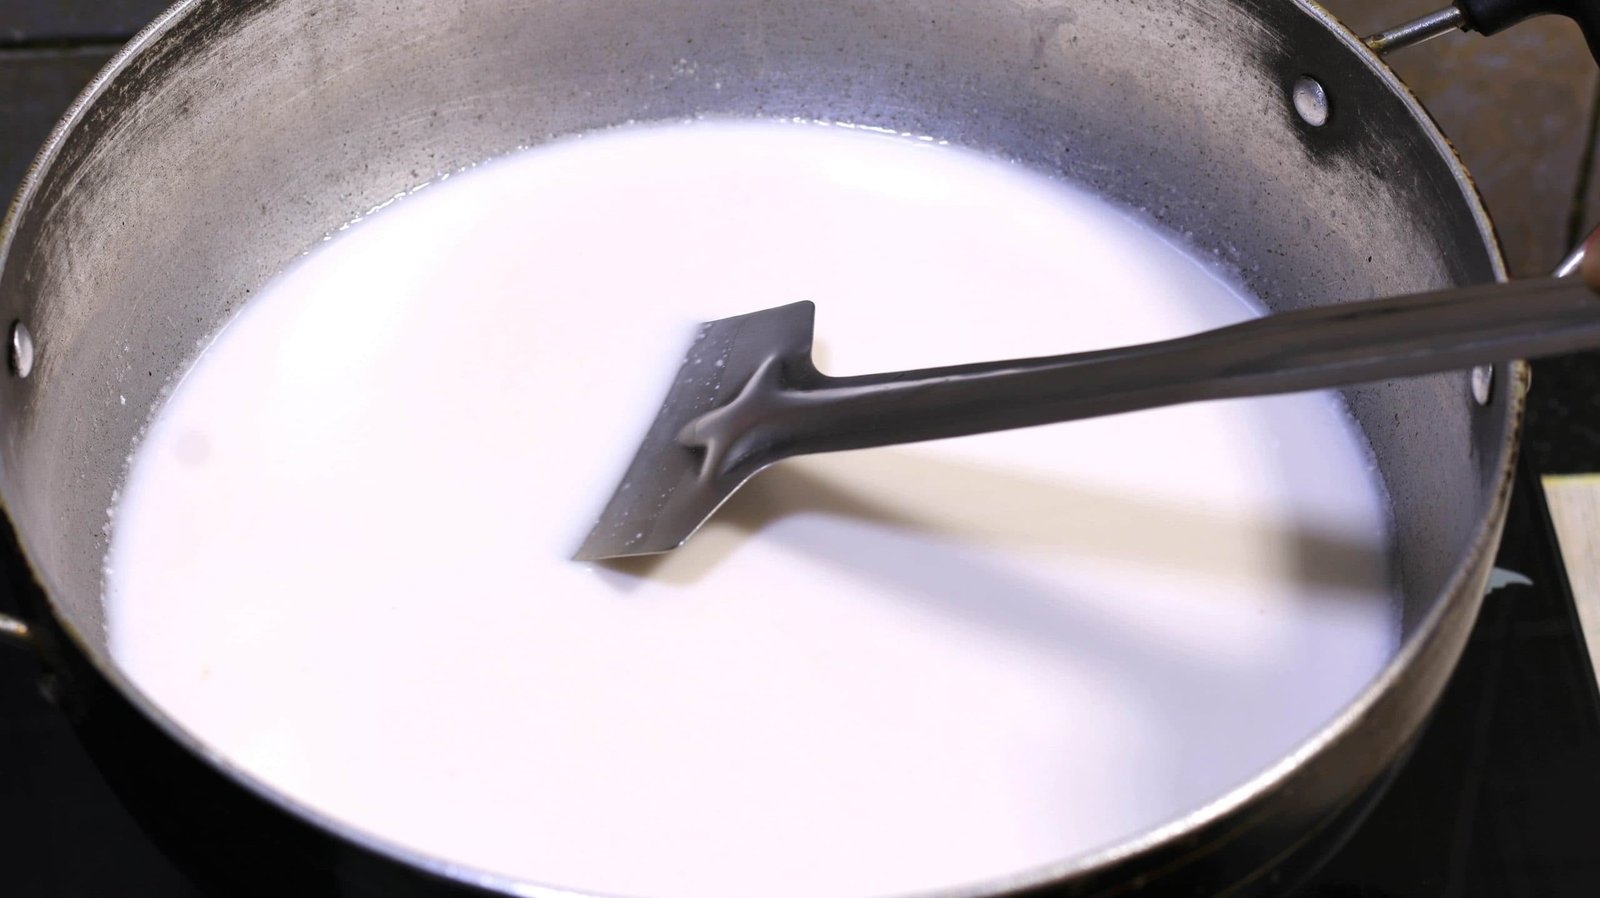 Stir the milk frequently on a low flame